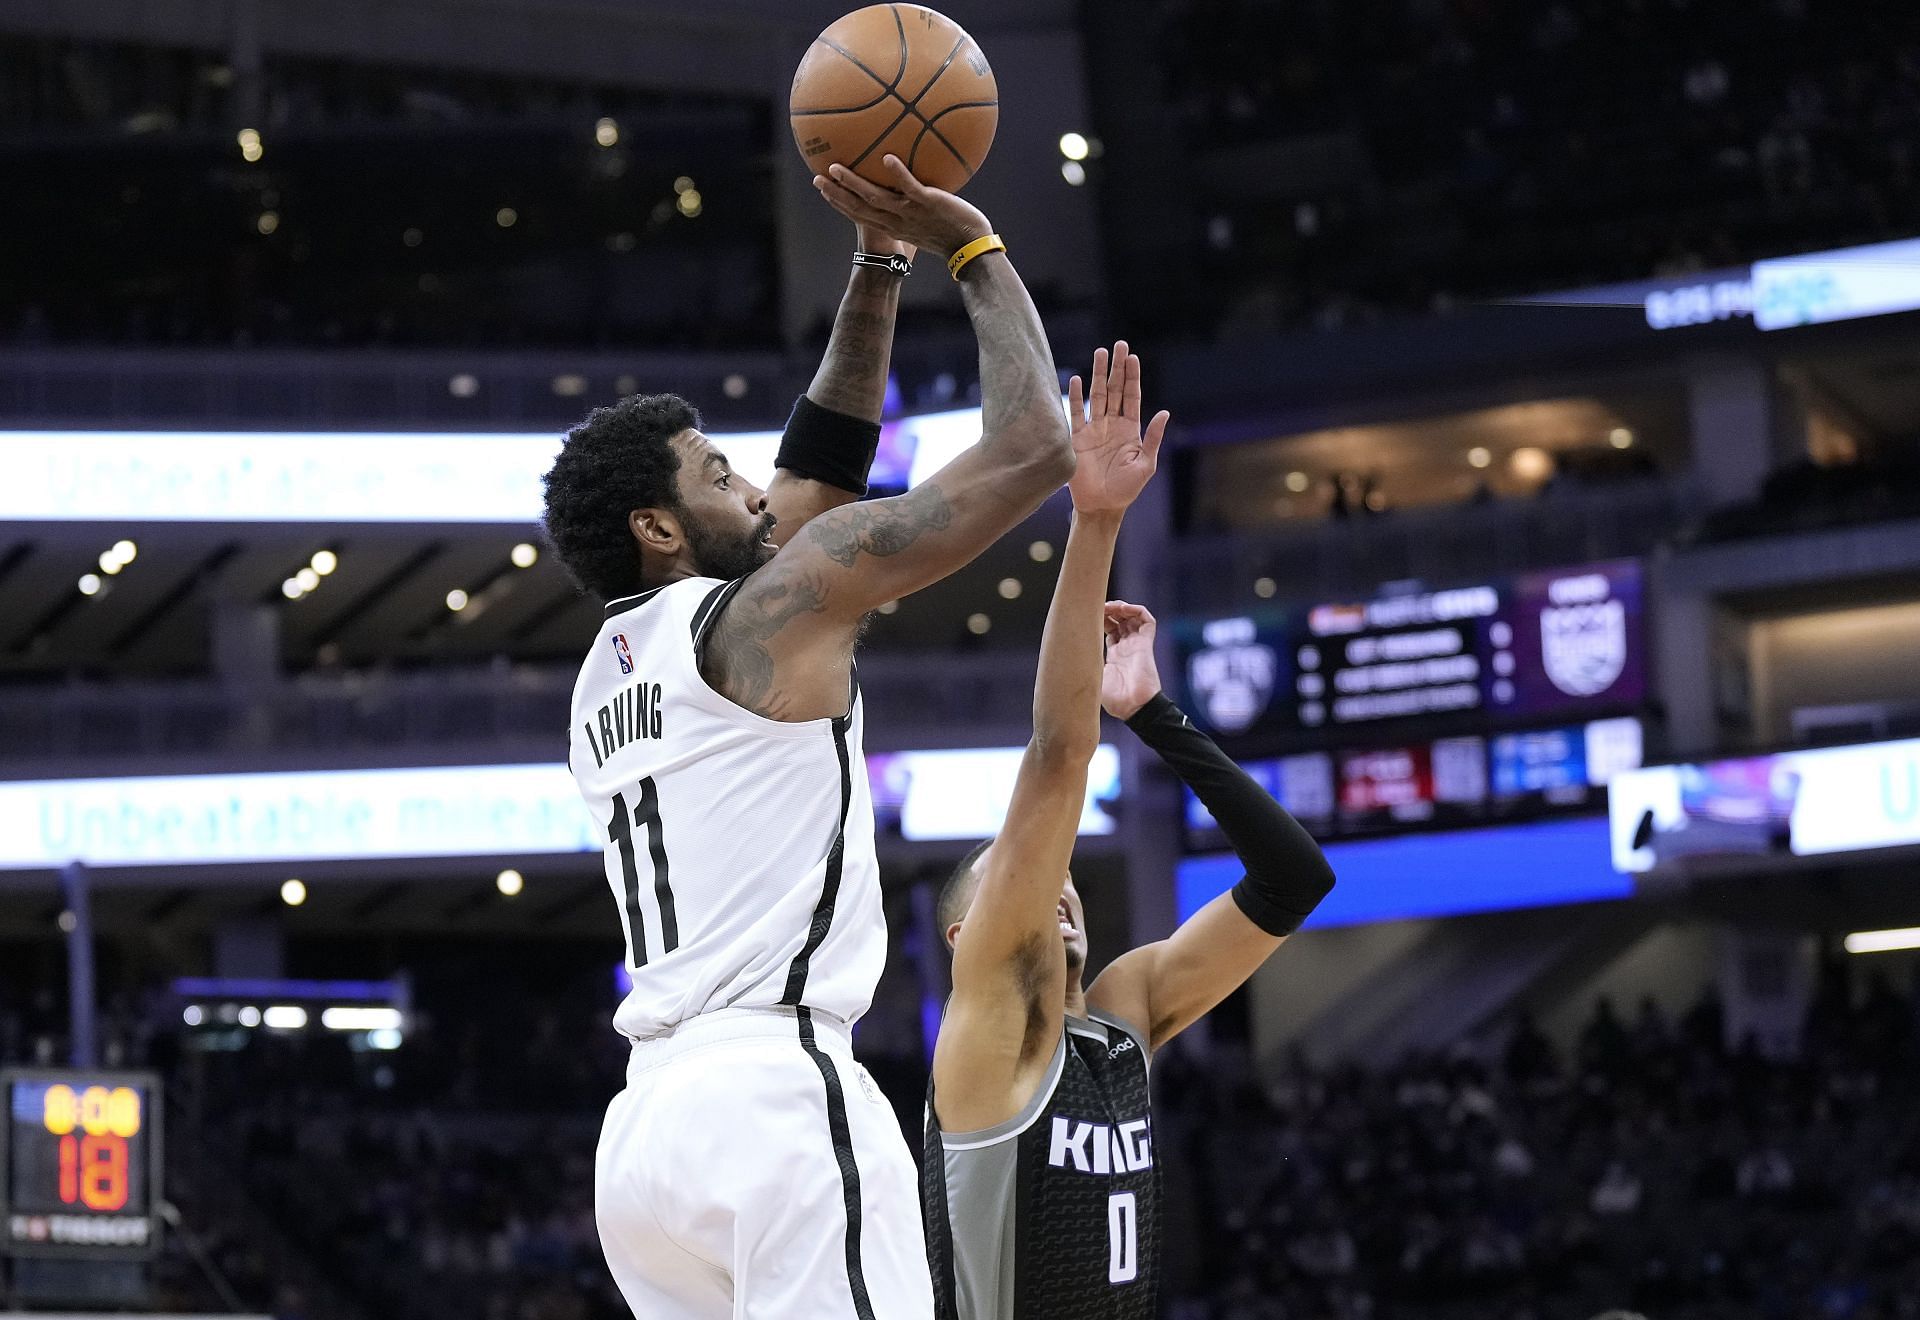 The Brooklyn Nets crashed to a defeat against the Sacramento Kings